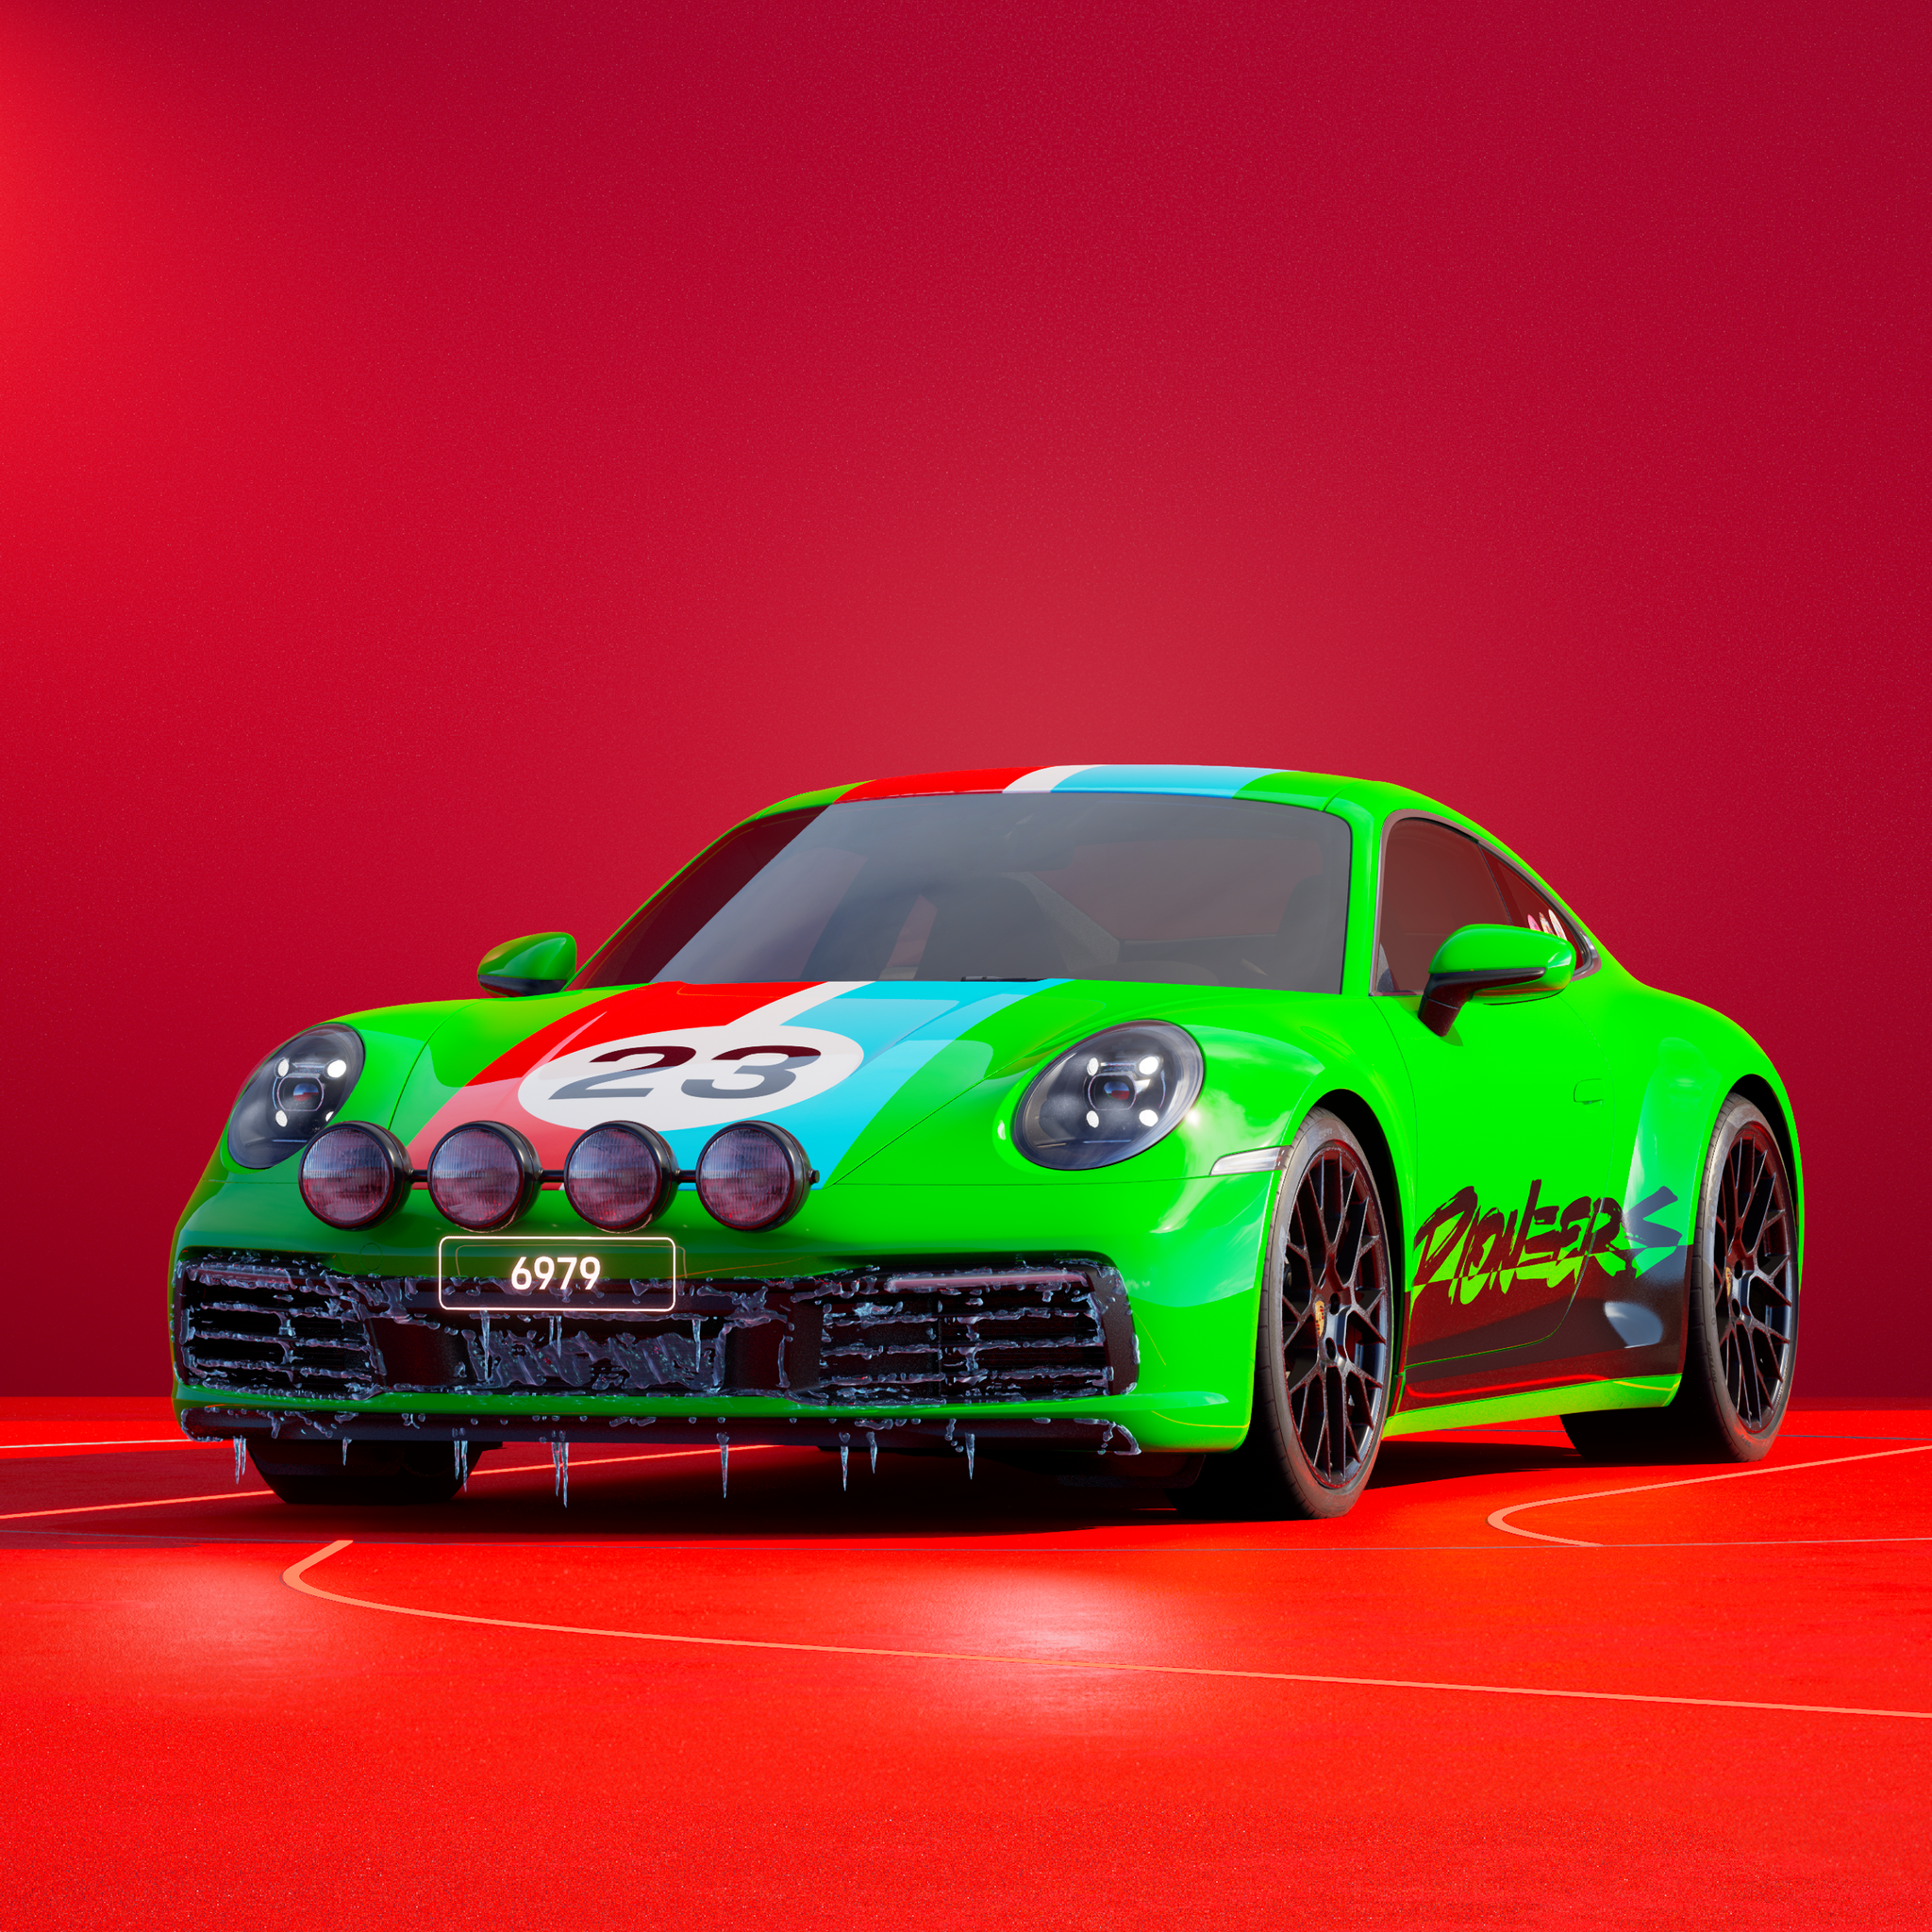 The PORSCHΞ 911 6979 image in phase